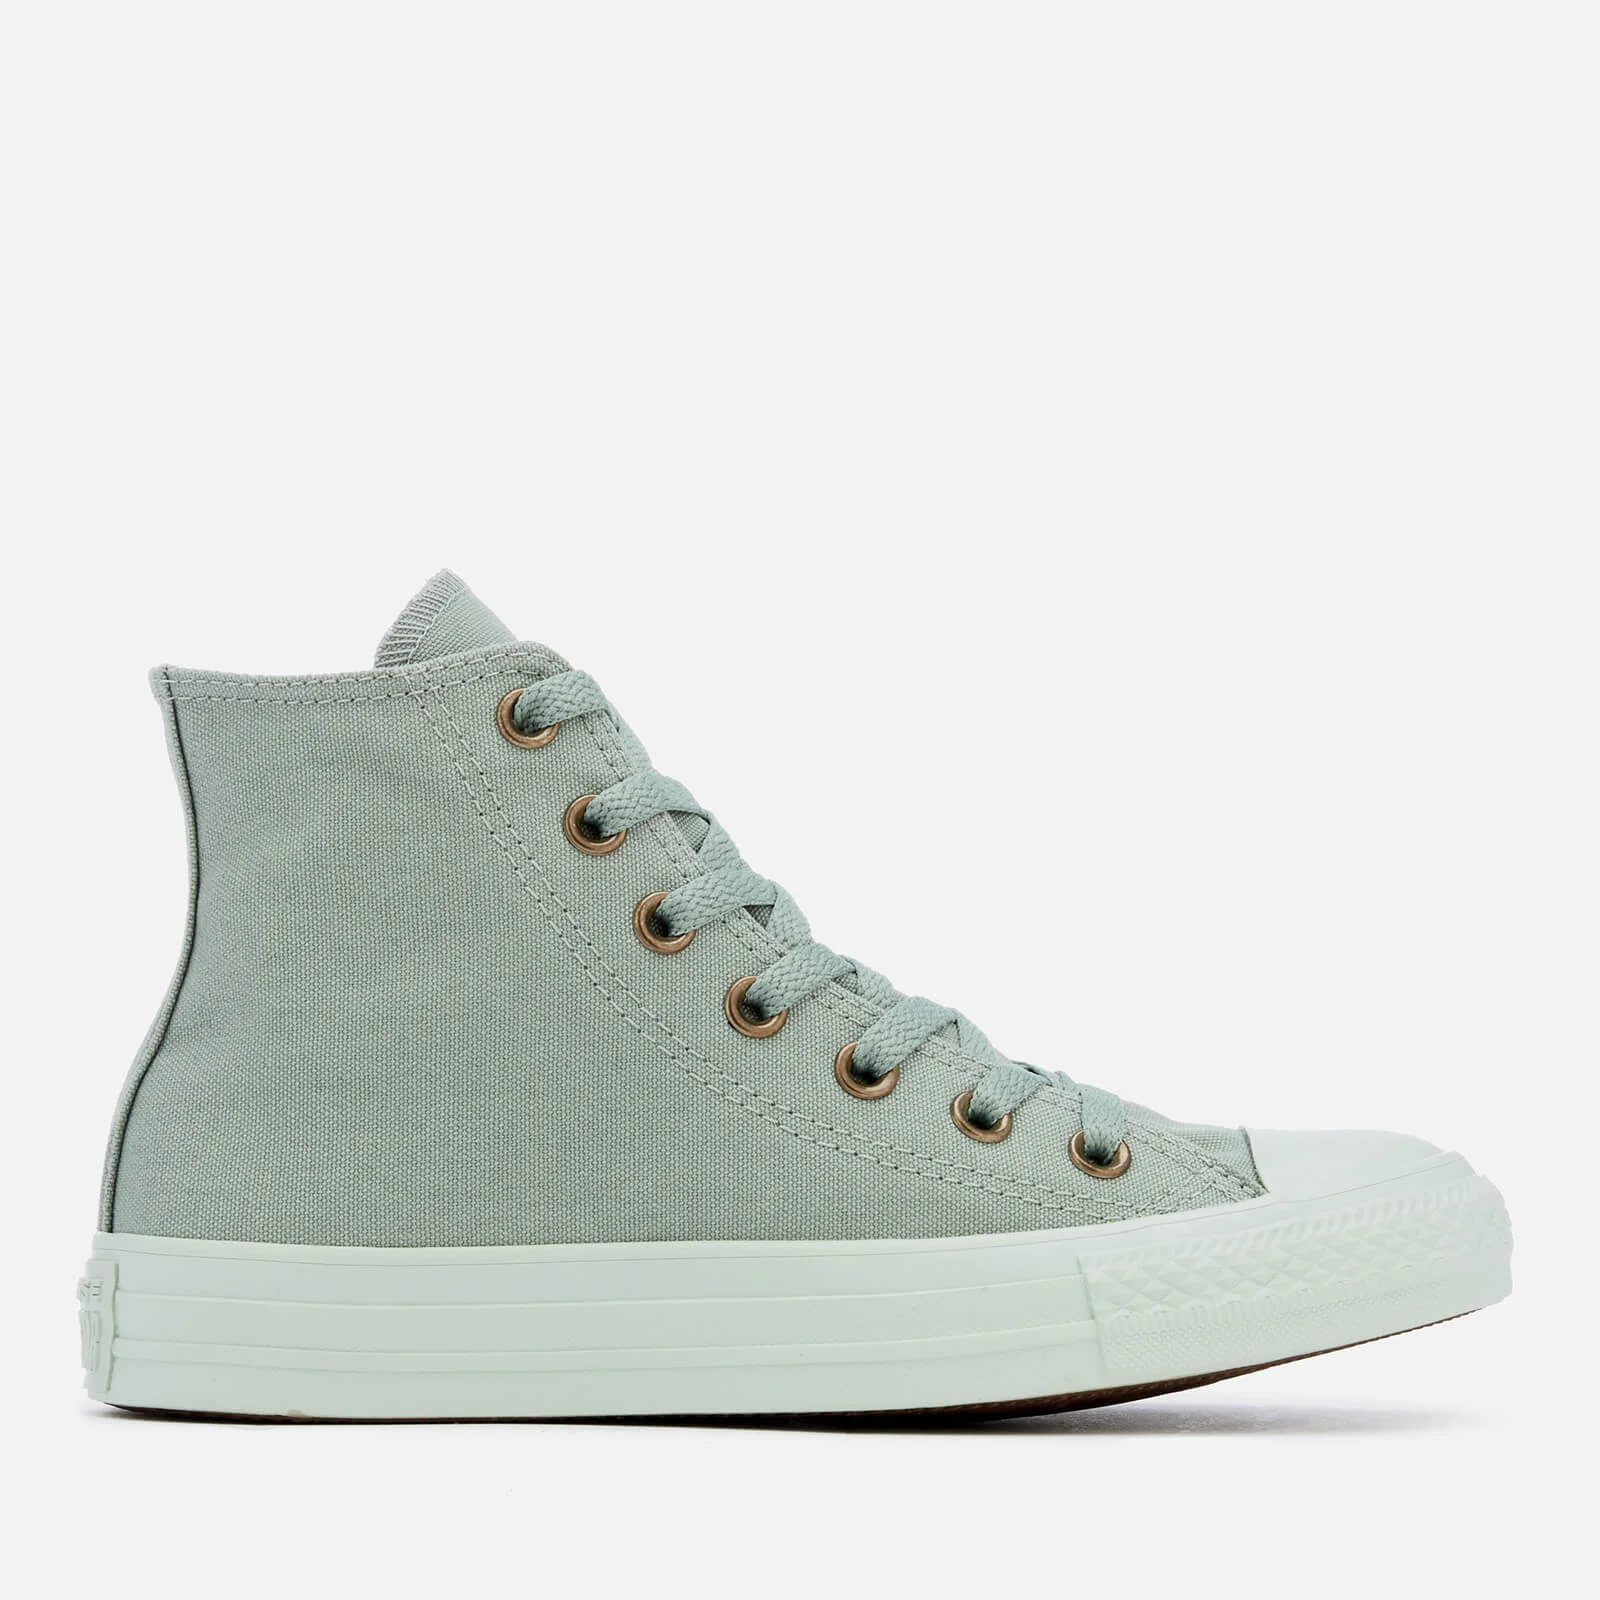 Converse Women's Chuck Taylor All Star Hi-Top Trainers - Mica Green Image 1